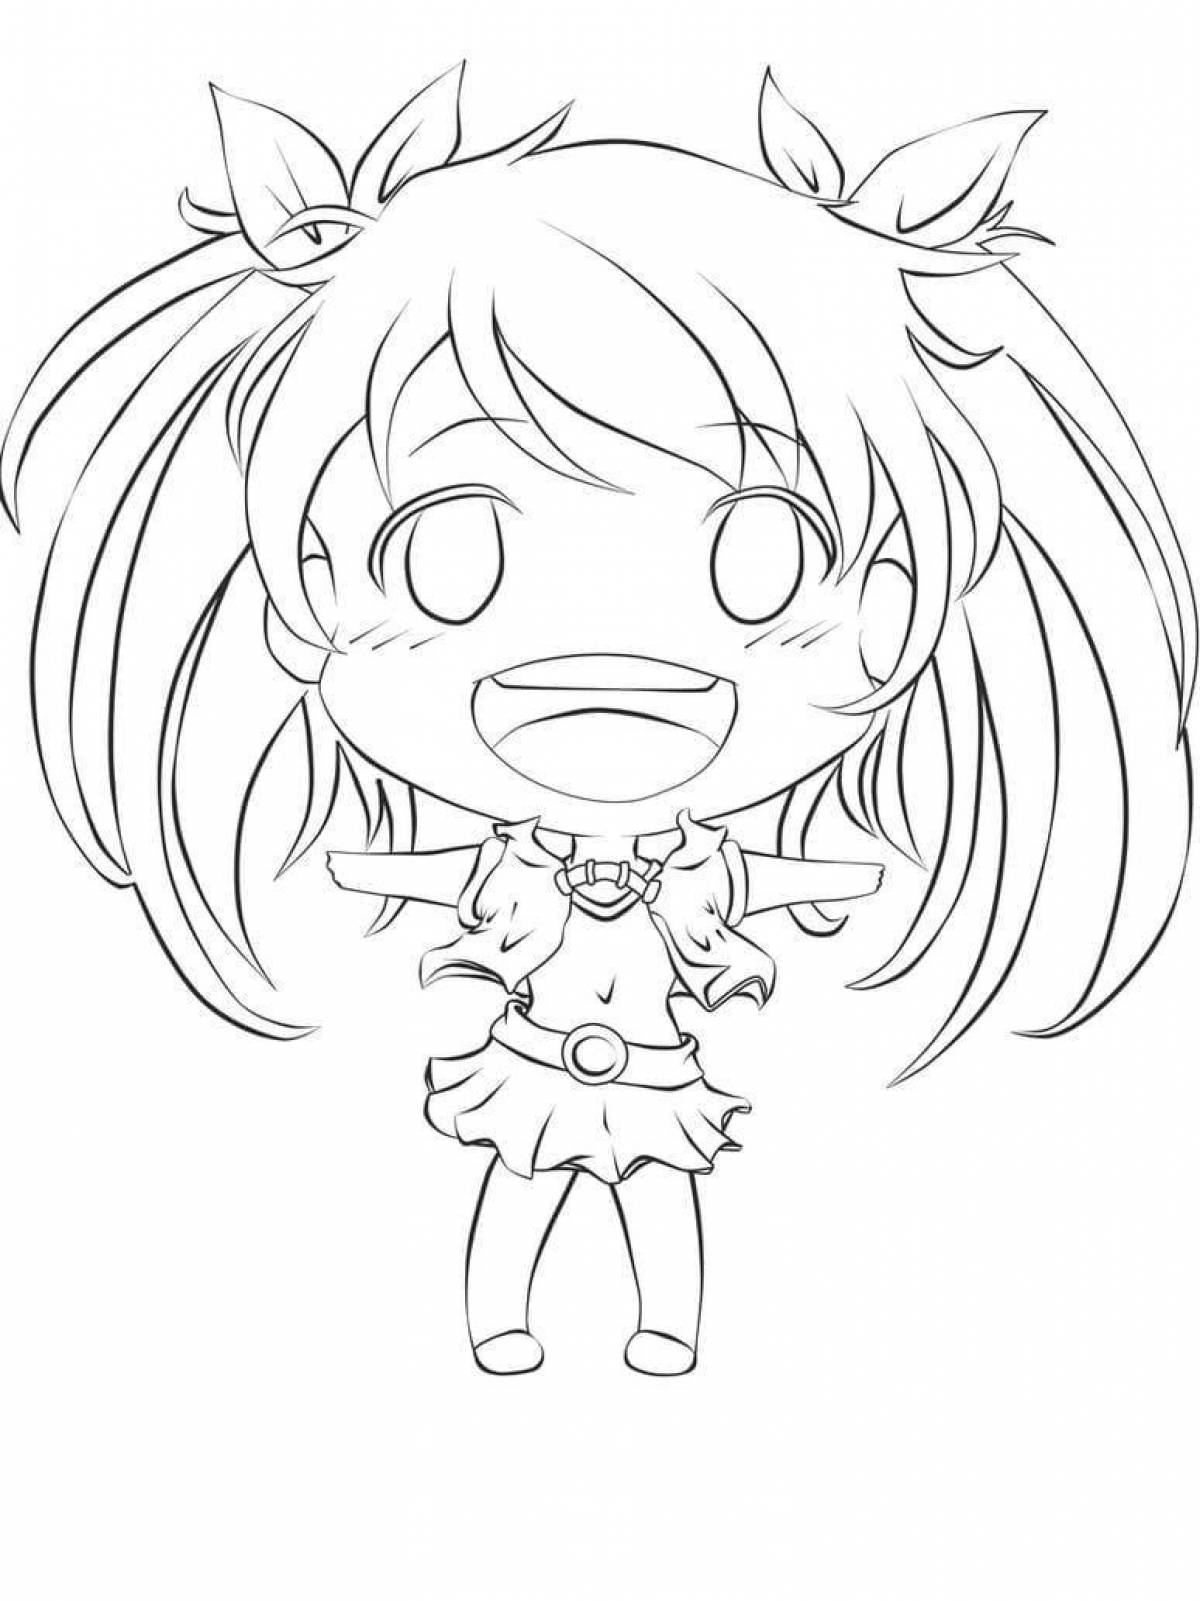 Colorful chibi anime coloring page